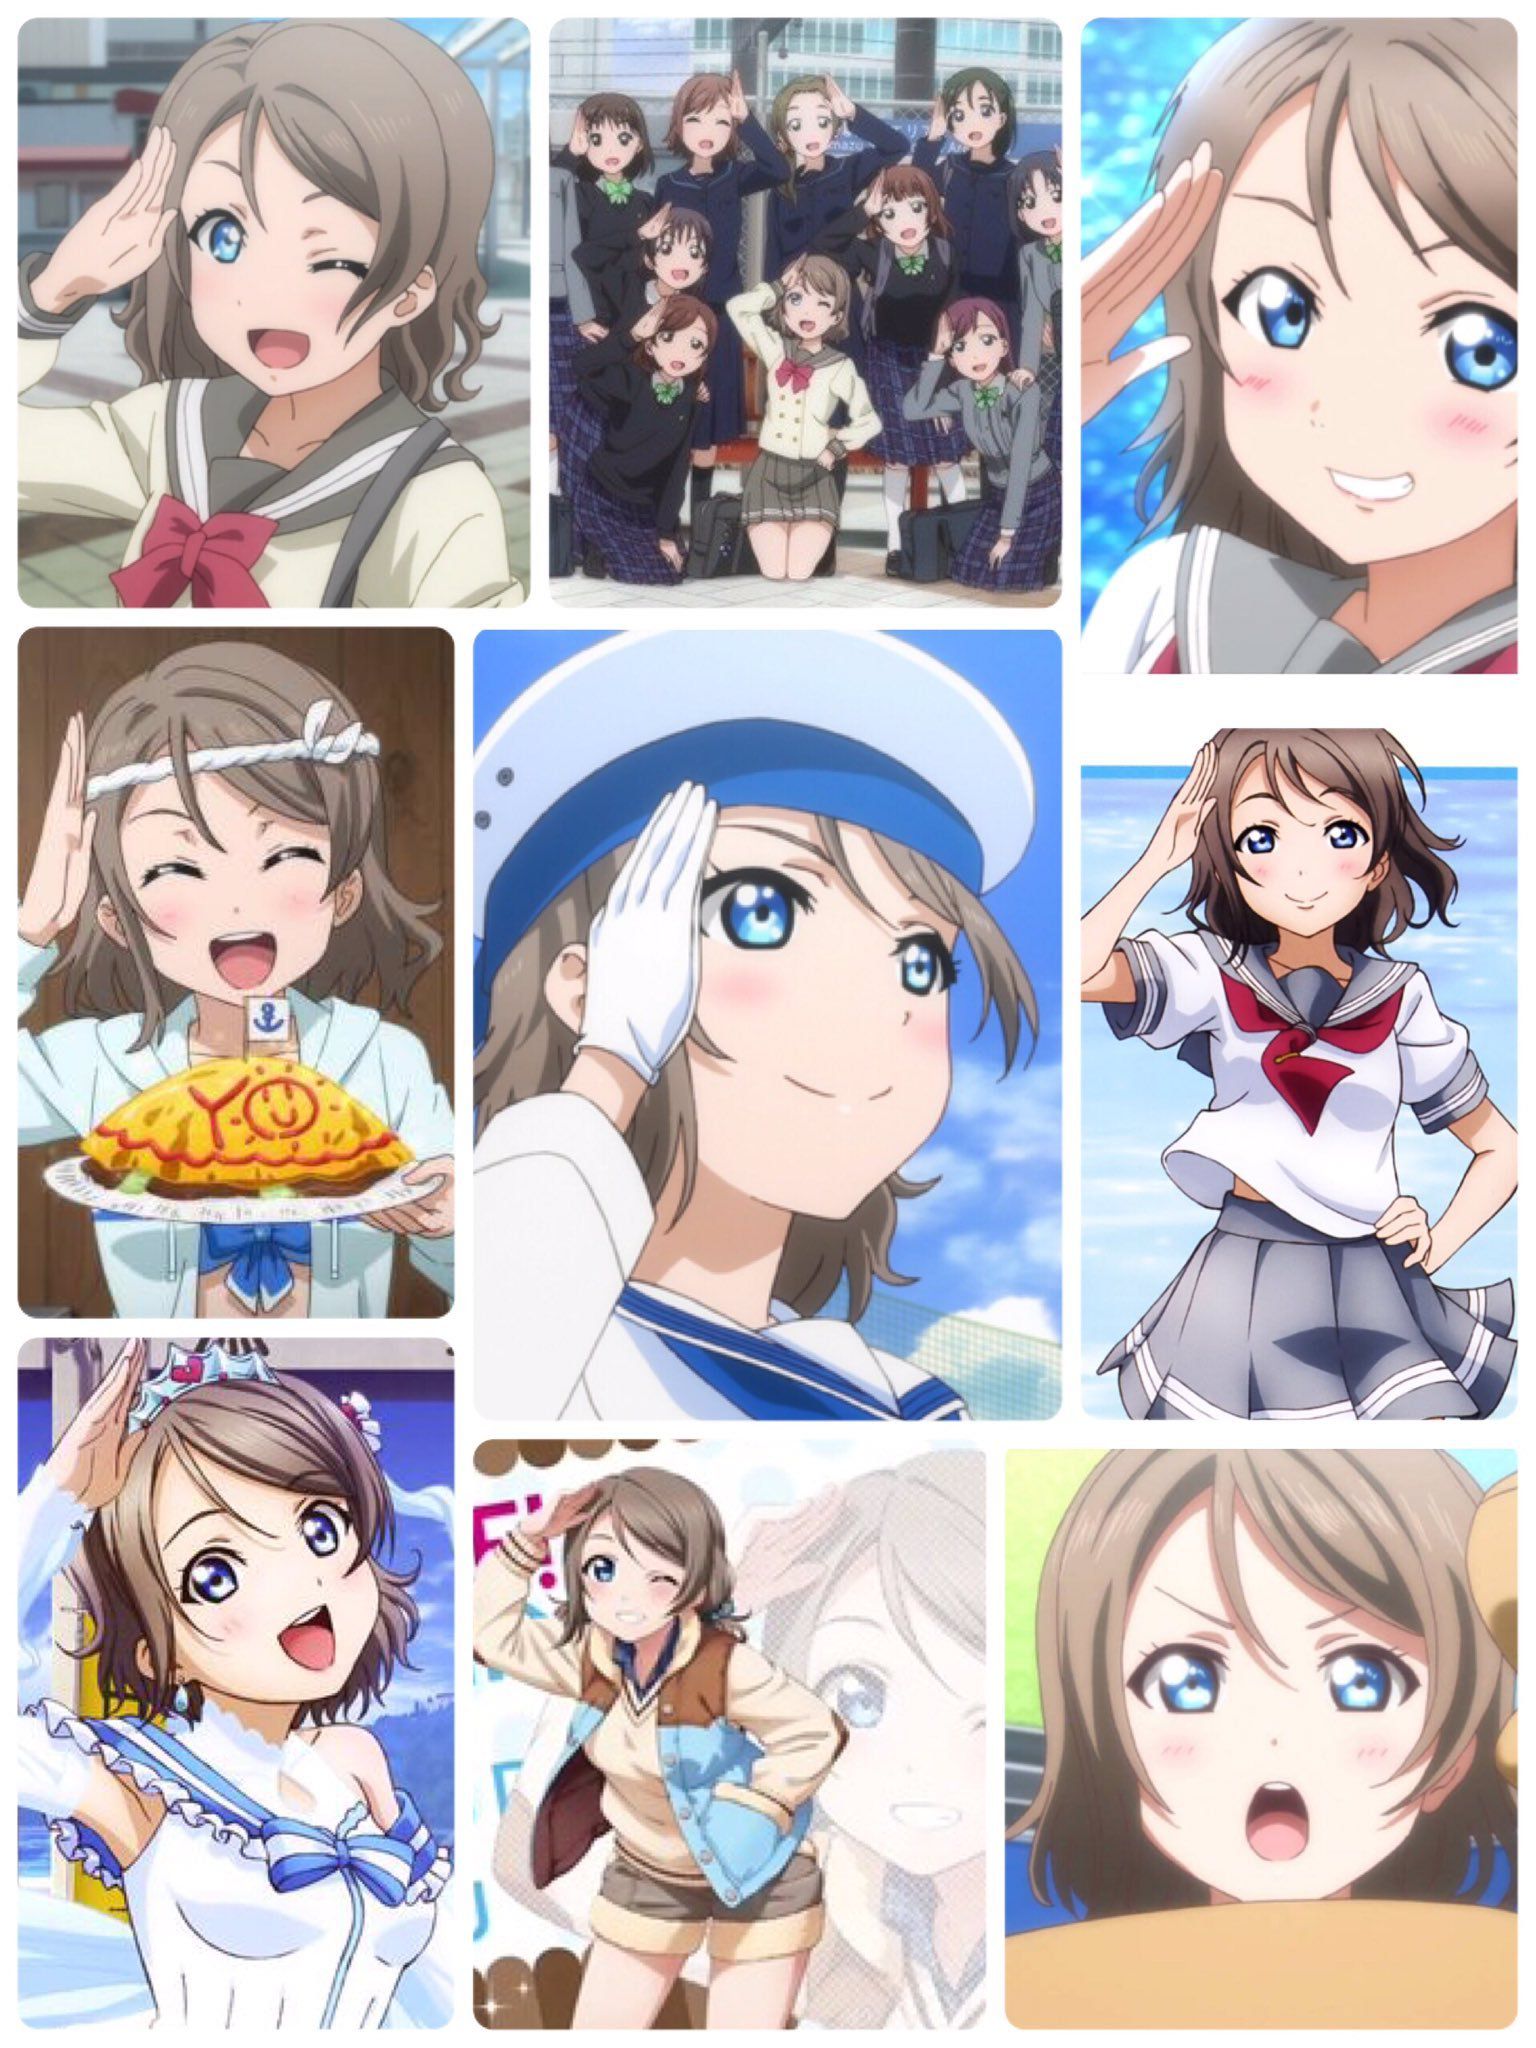 Love Live, Sunshine! Watanabe, Ken (Watanabe) Erotic pictures and Moe image Part 5 23